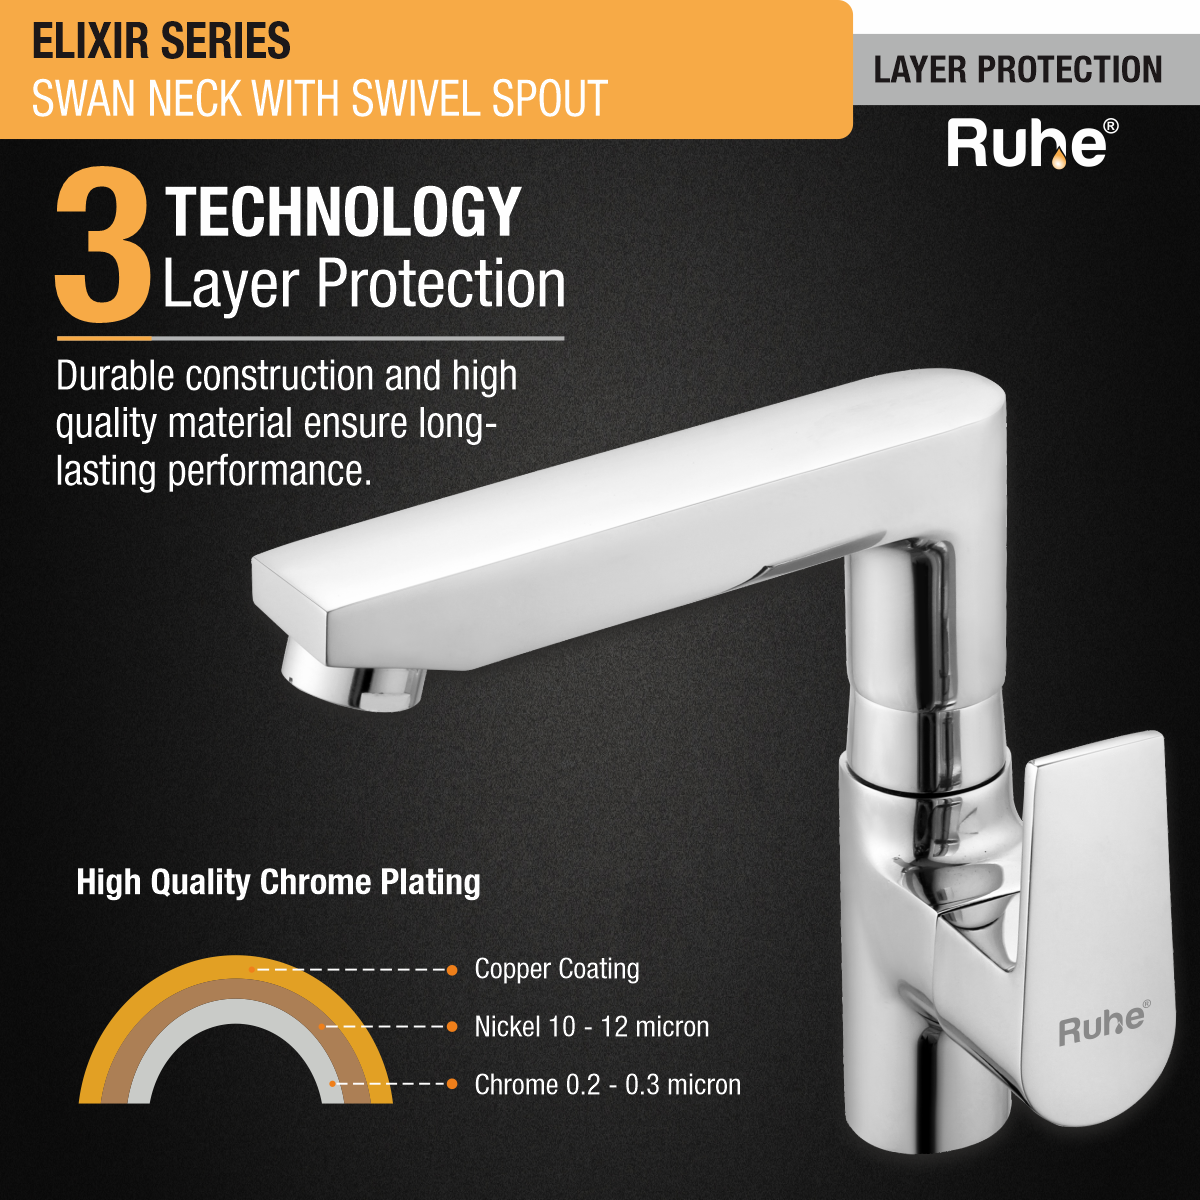 Elixir Swan Neck with Swivel Spout Faucet 3 layer protection